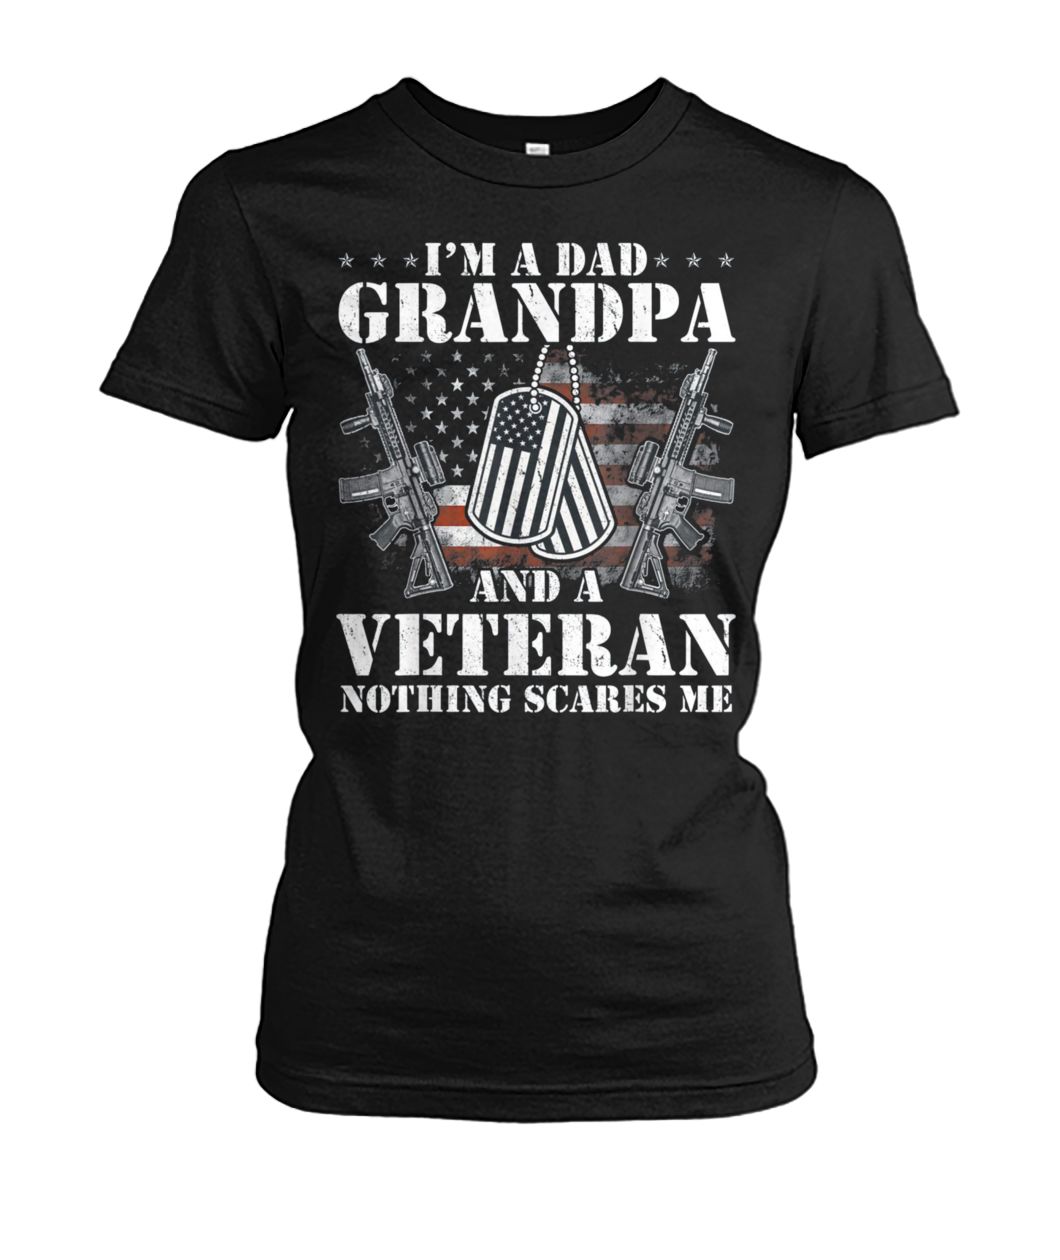 I'm a dad grandpa and a veteran nothing scares me women's crew tee